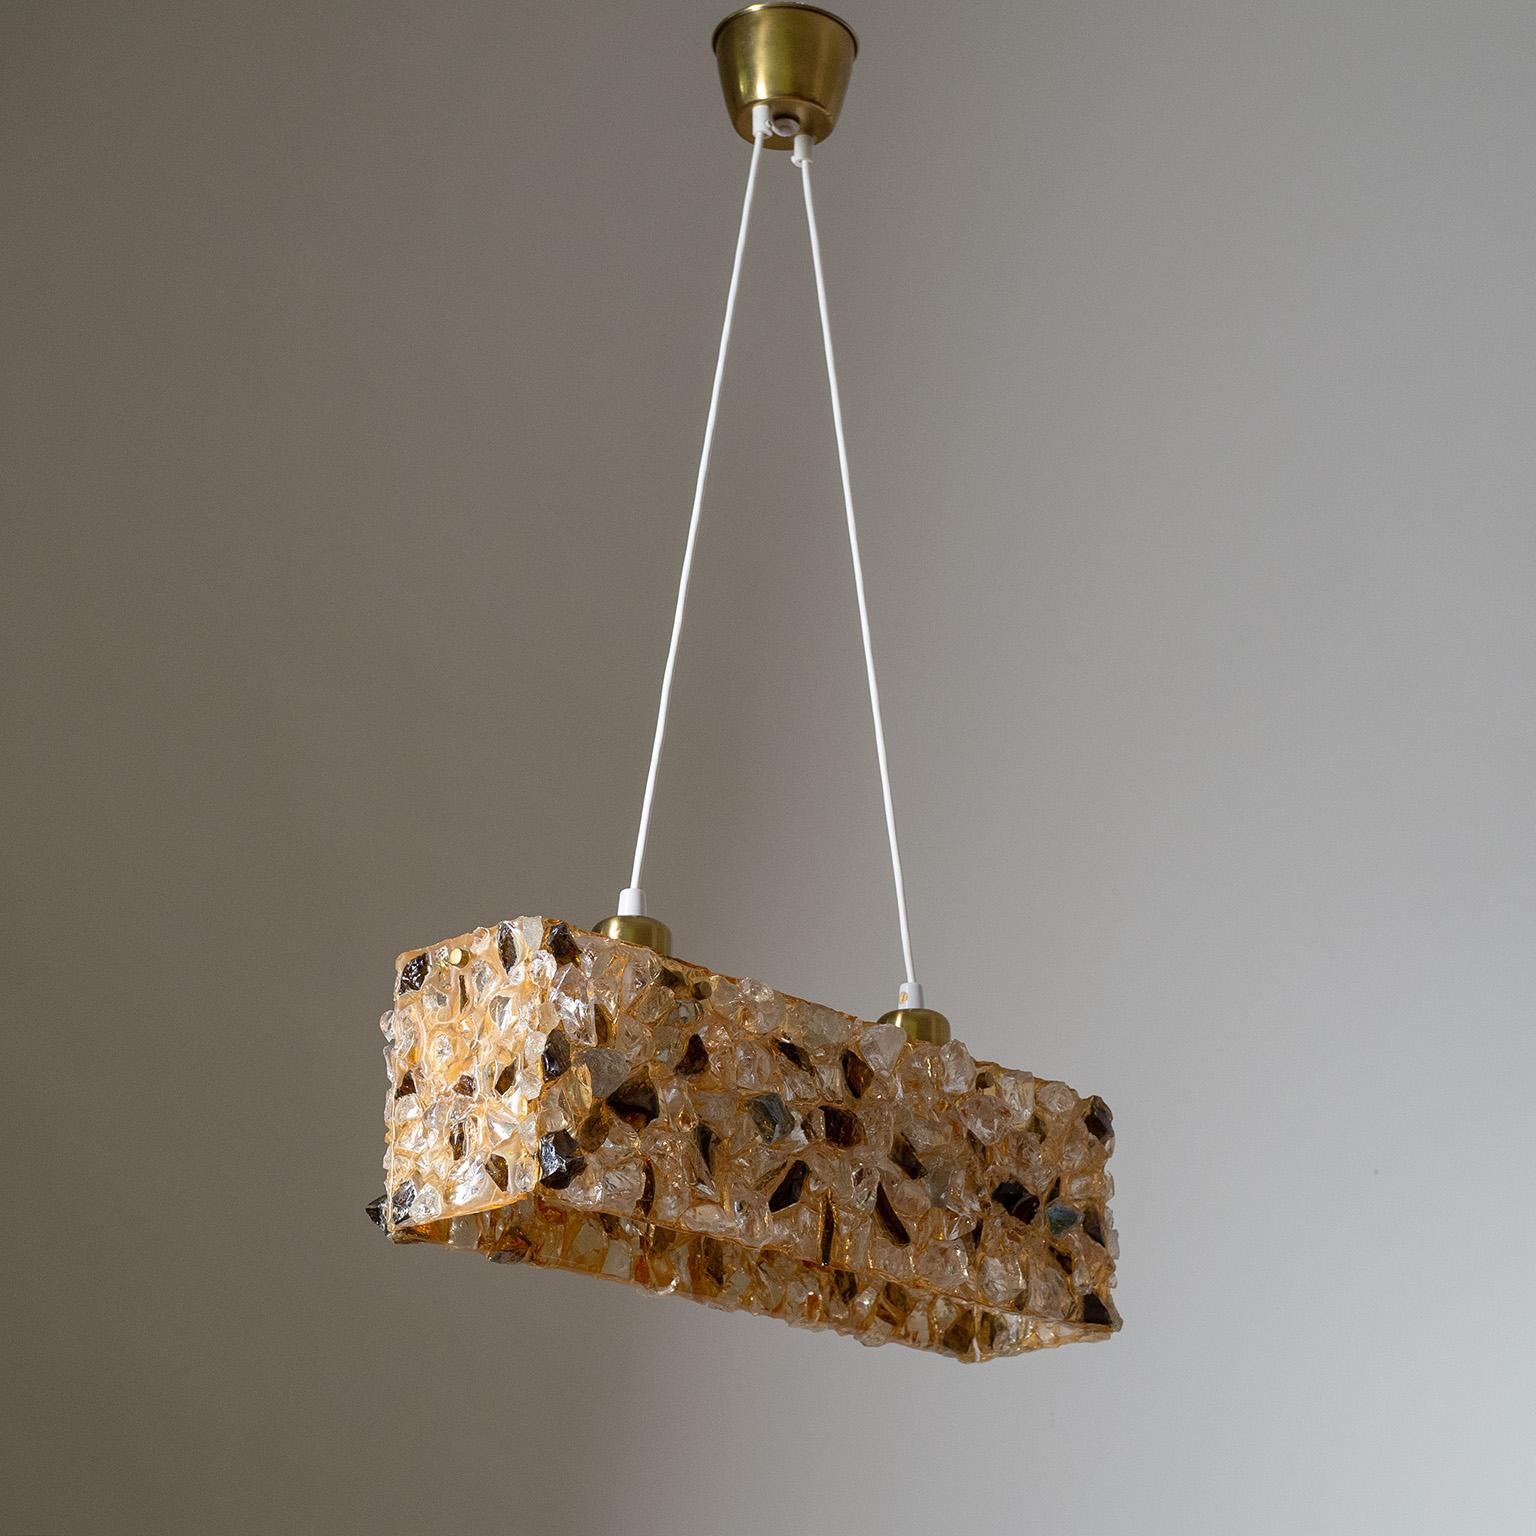 Fine Brutalist glass and resin suspension light from the 1960-1970s. Chunks of clear and tinted glass shards are embedded into an amber colored resin body and suspended by two wires leading to two original brass E27 sockets with new wiring.